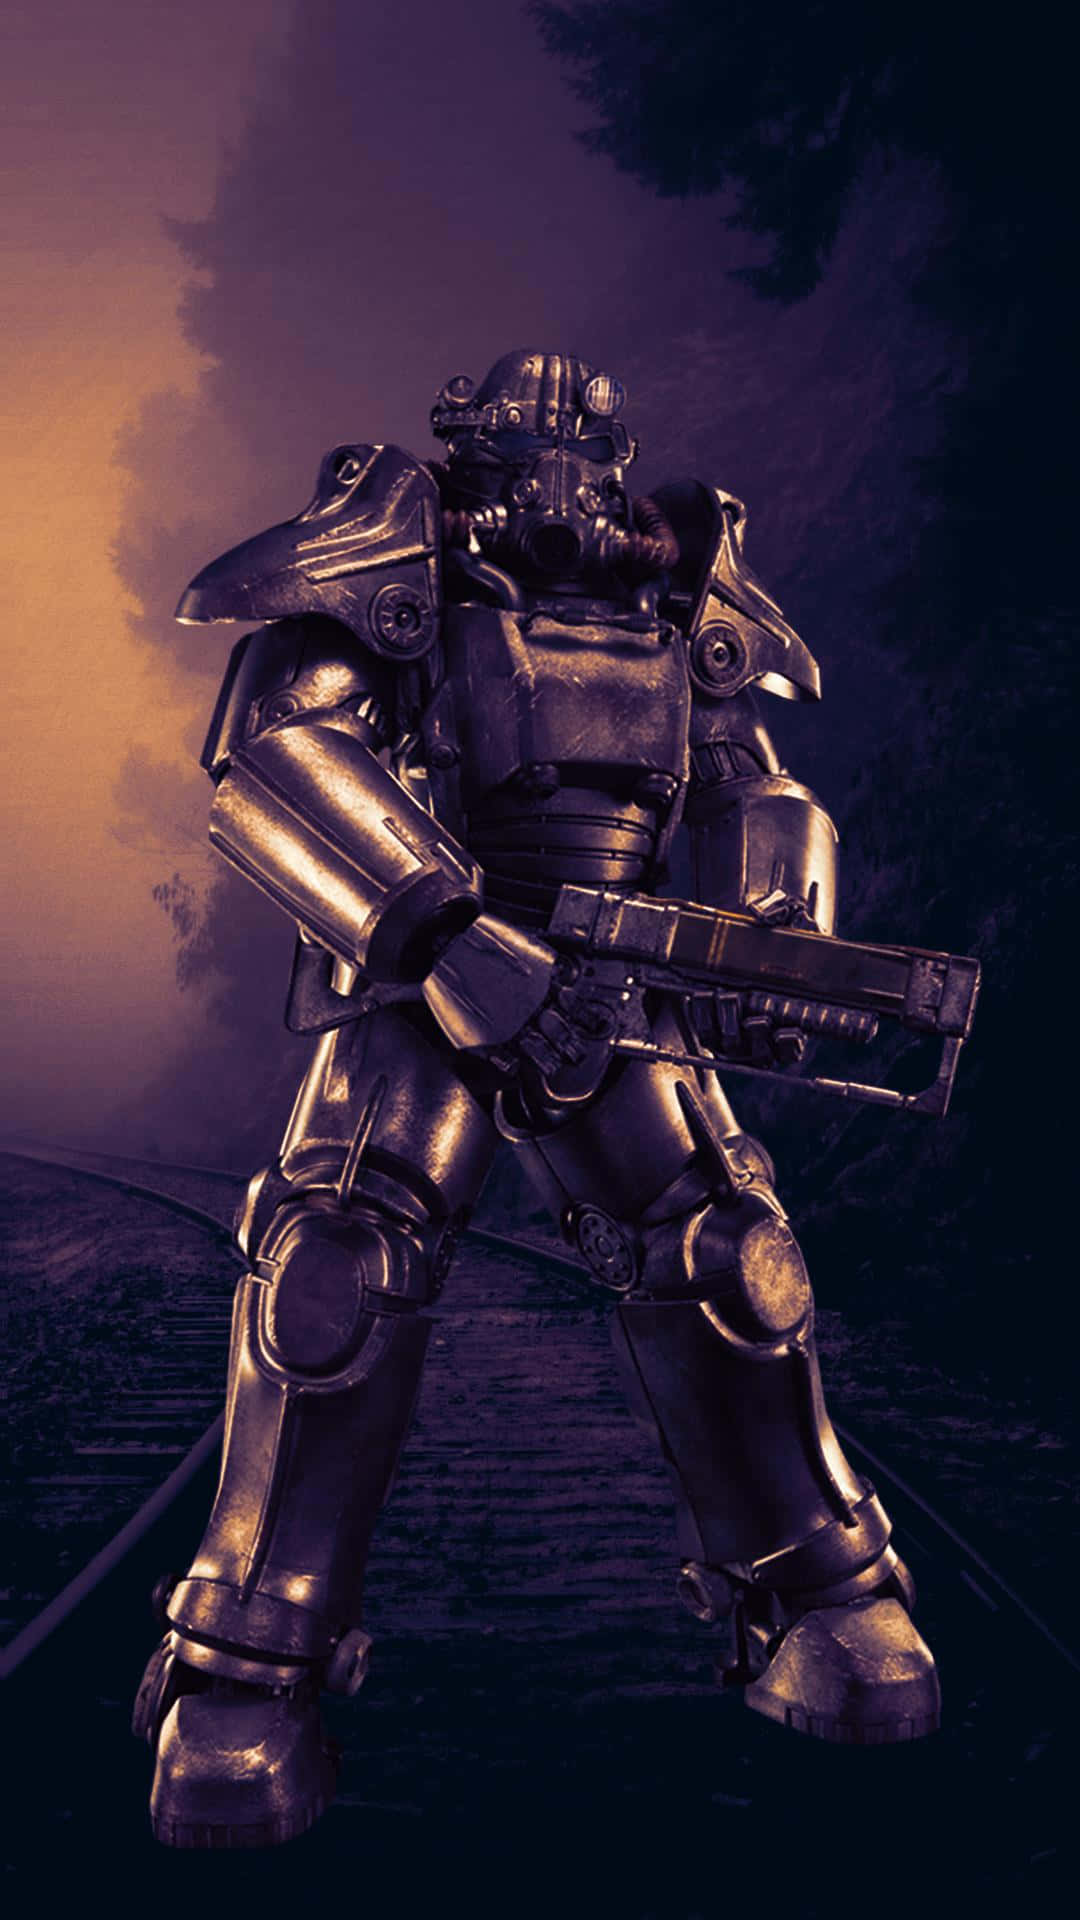 The Sole Survivor donning T-60 Power Armor in the Wasteland of Fallout 4 Wallpaper